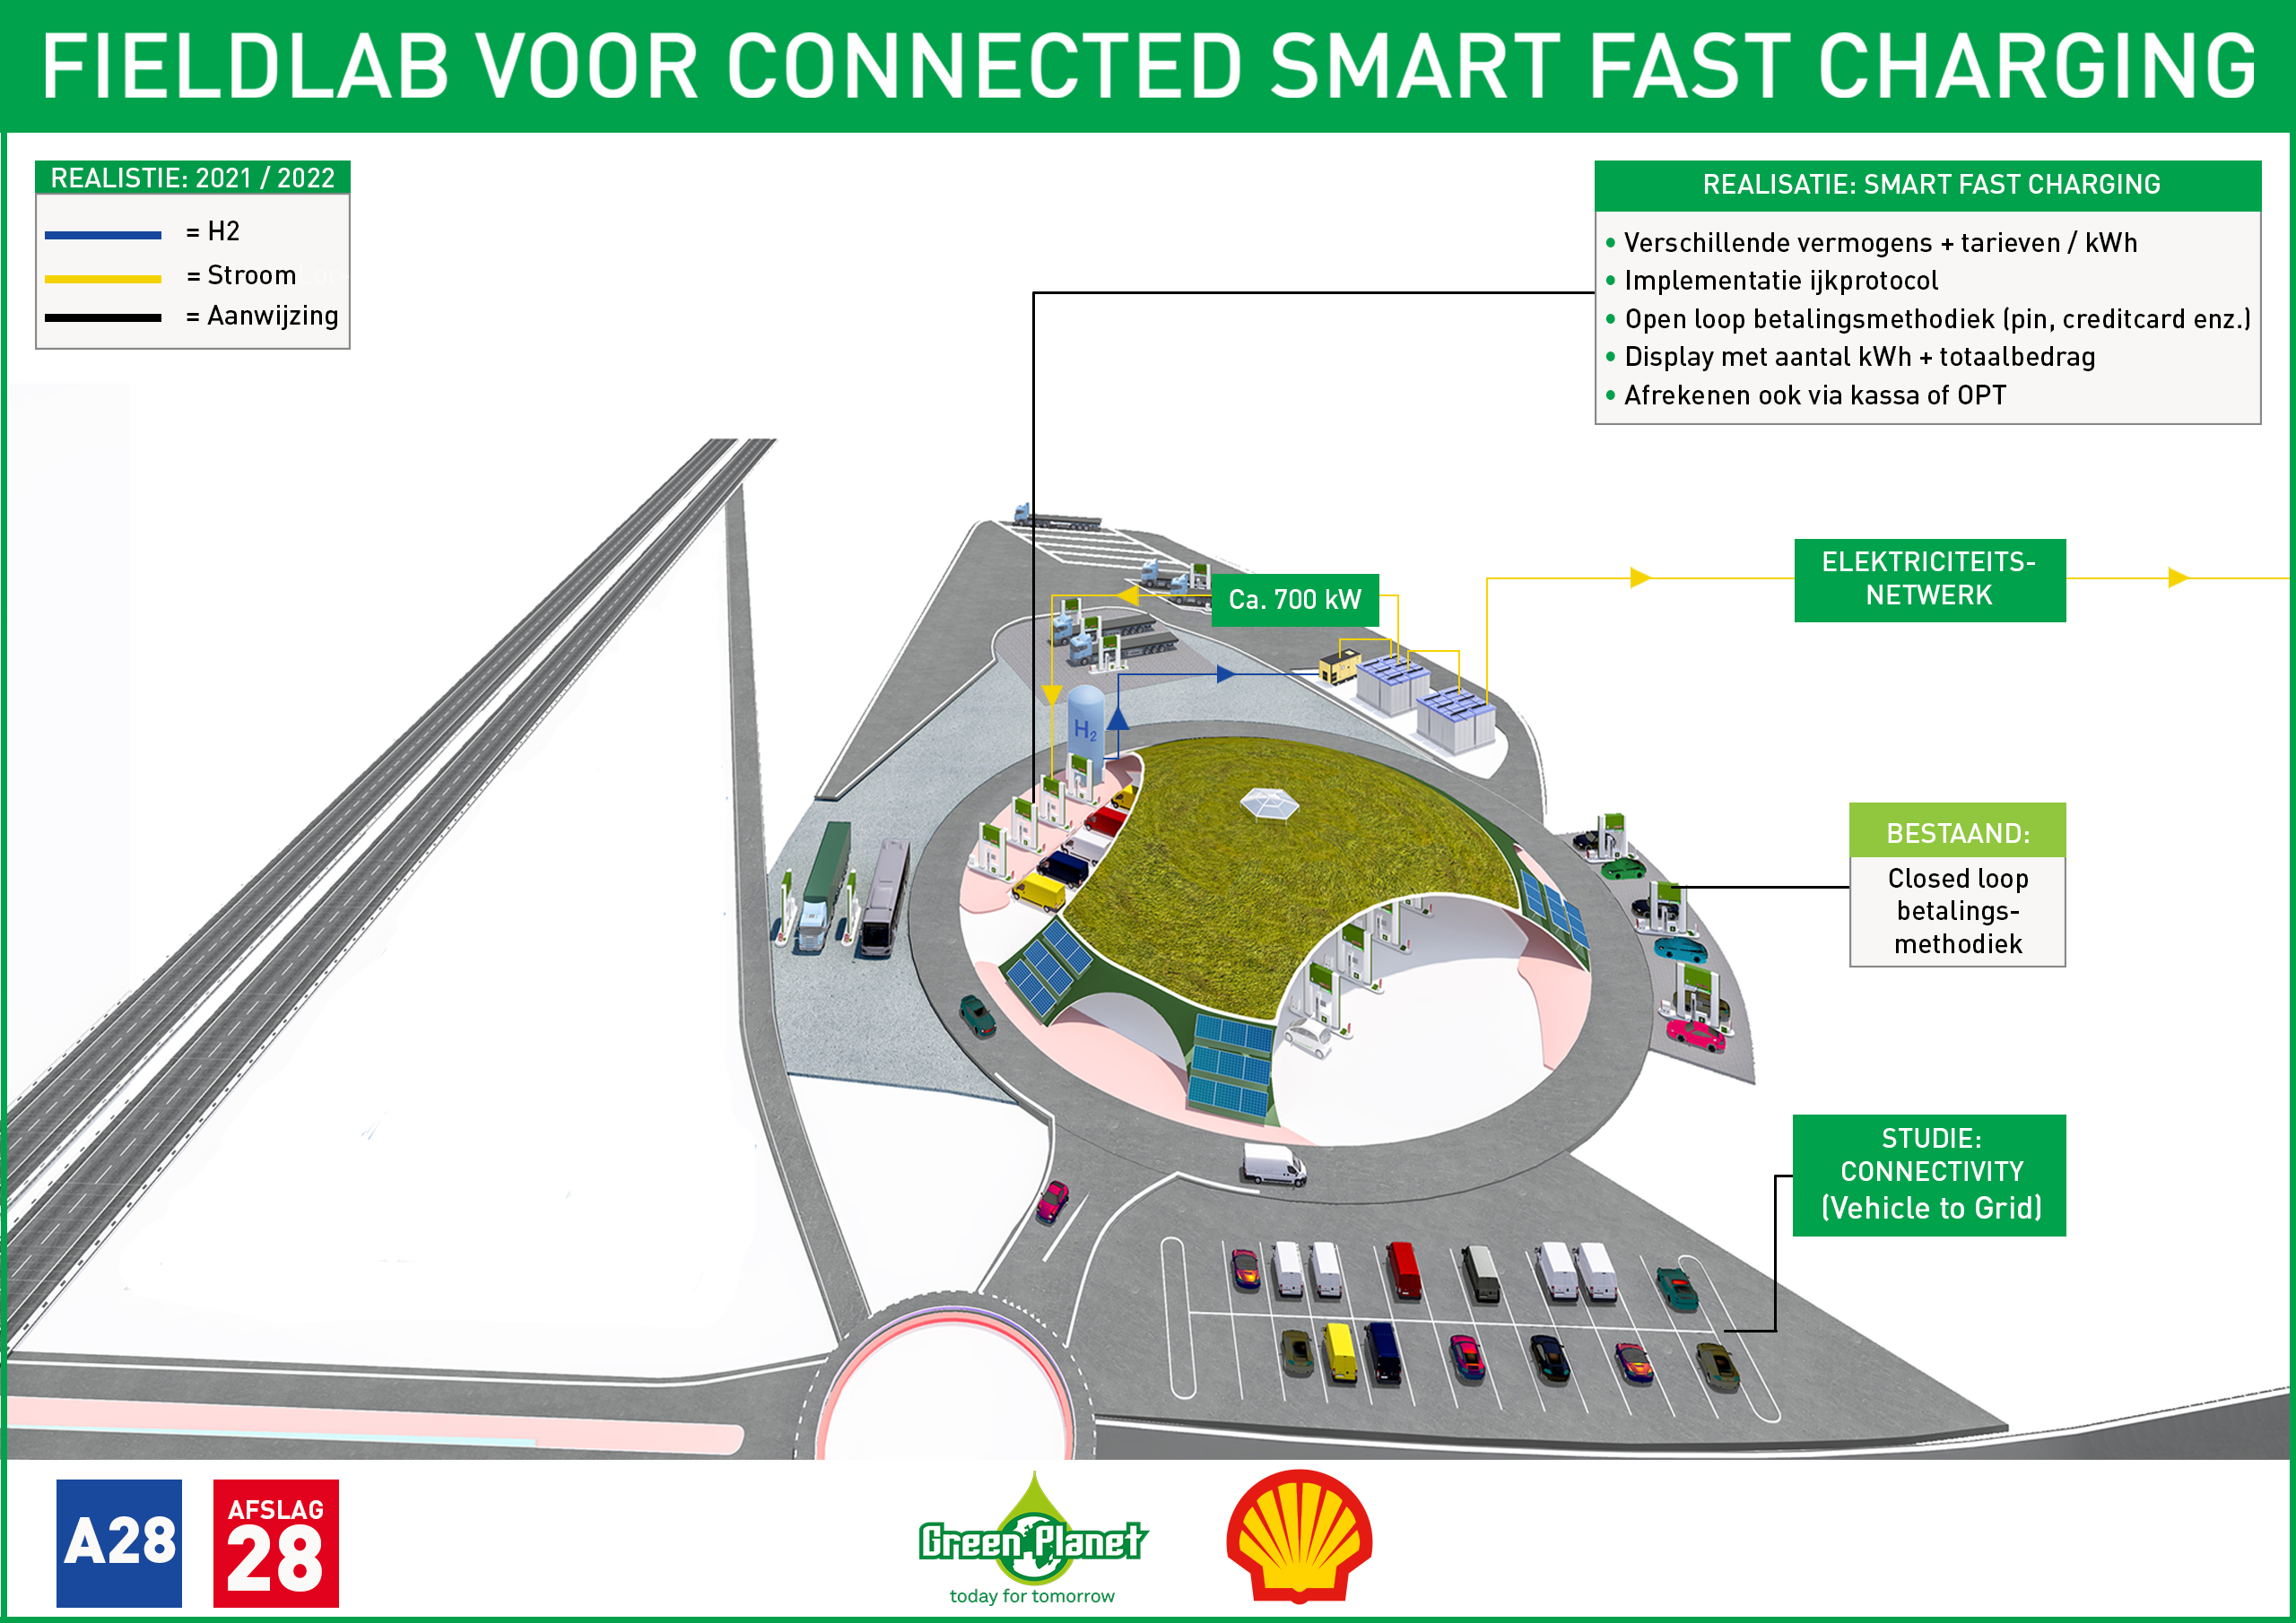 Fieldlab for Connected Smart Fast Charging